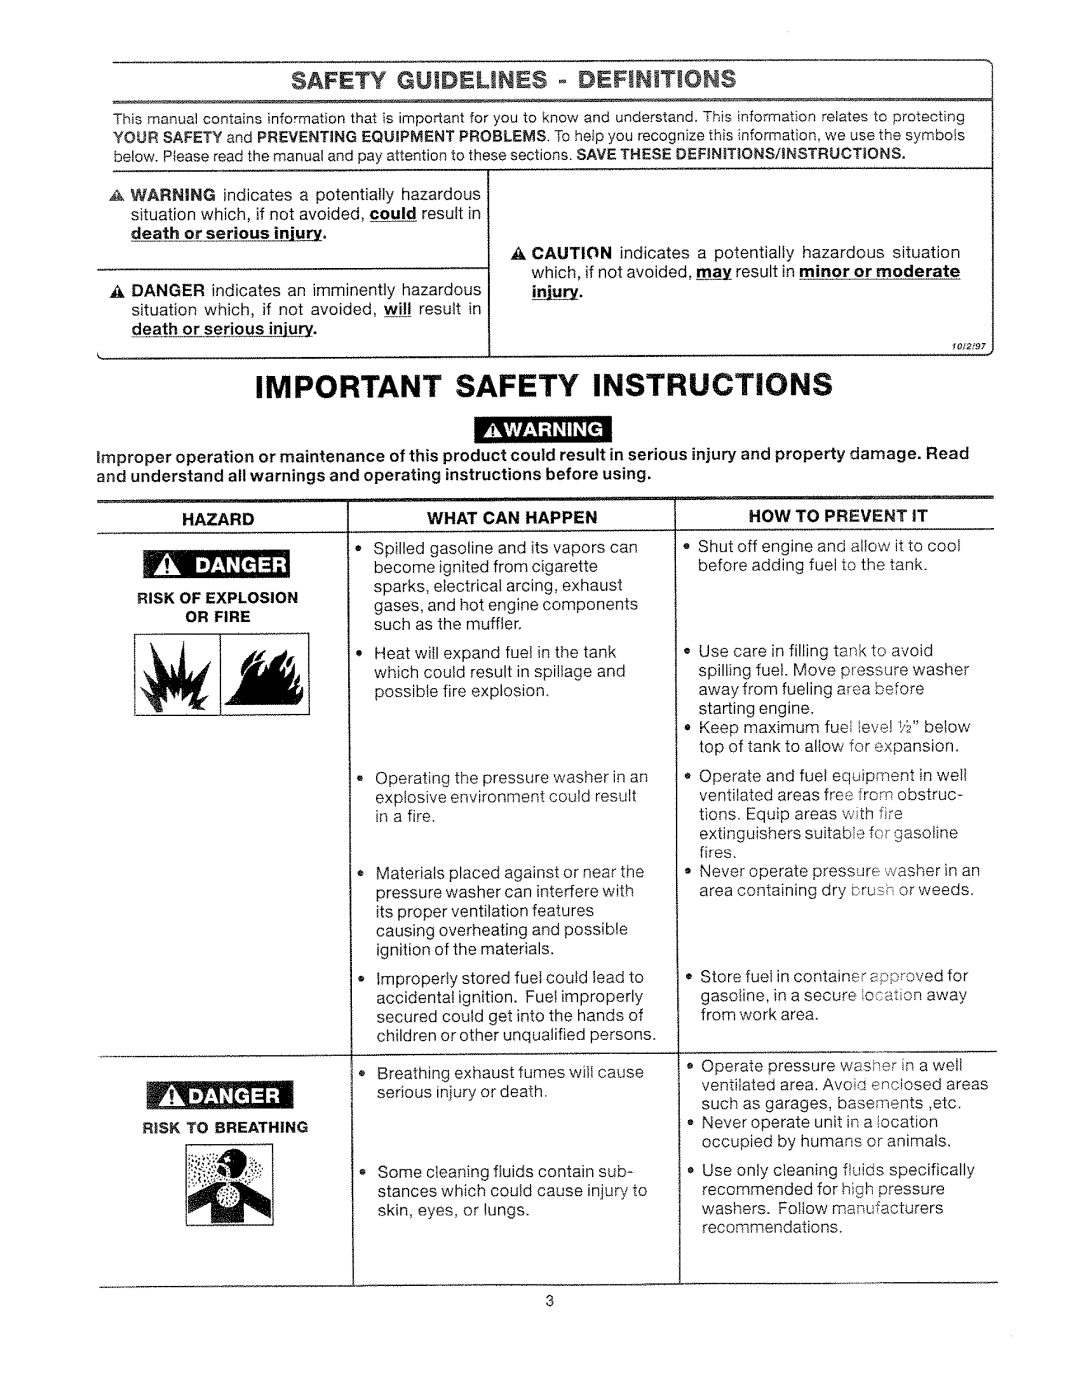 Craftsman 919.762500 manual Important Safety Instructions, Safety Guidelines - Definitions, death or serious inju_ 